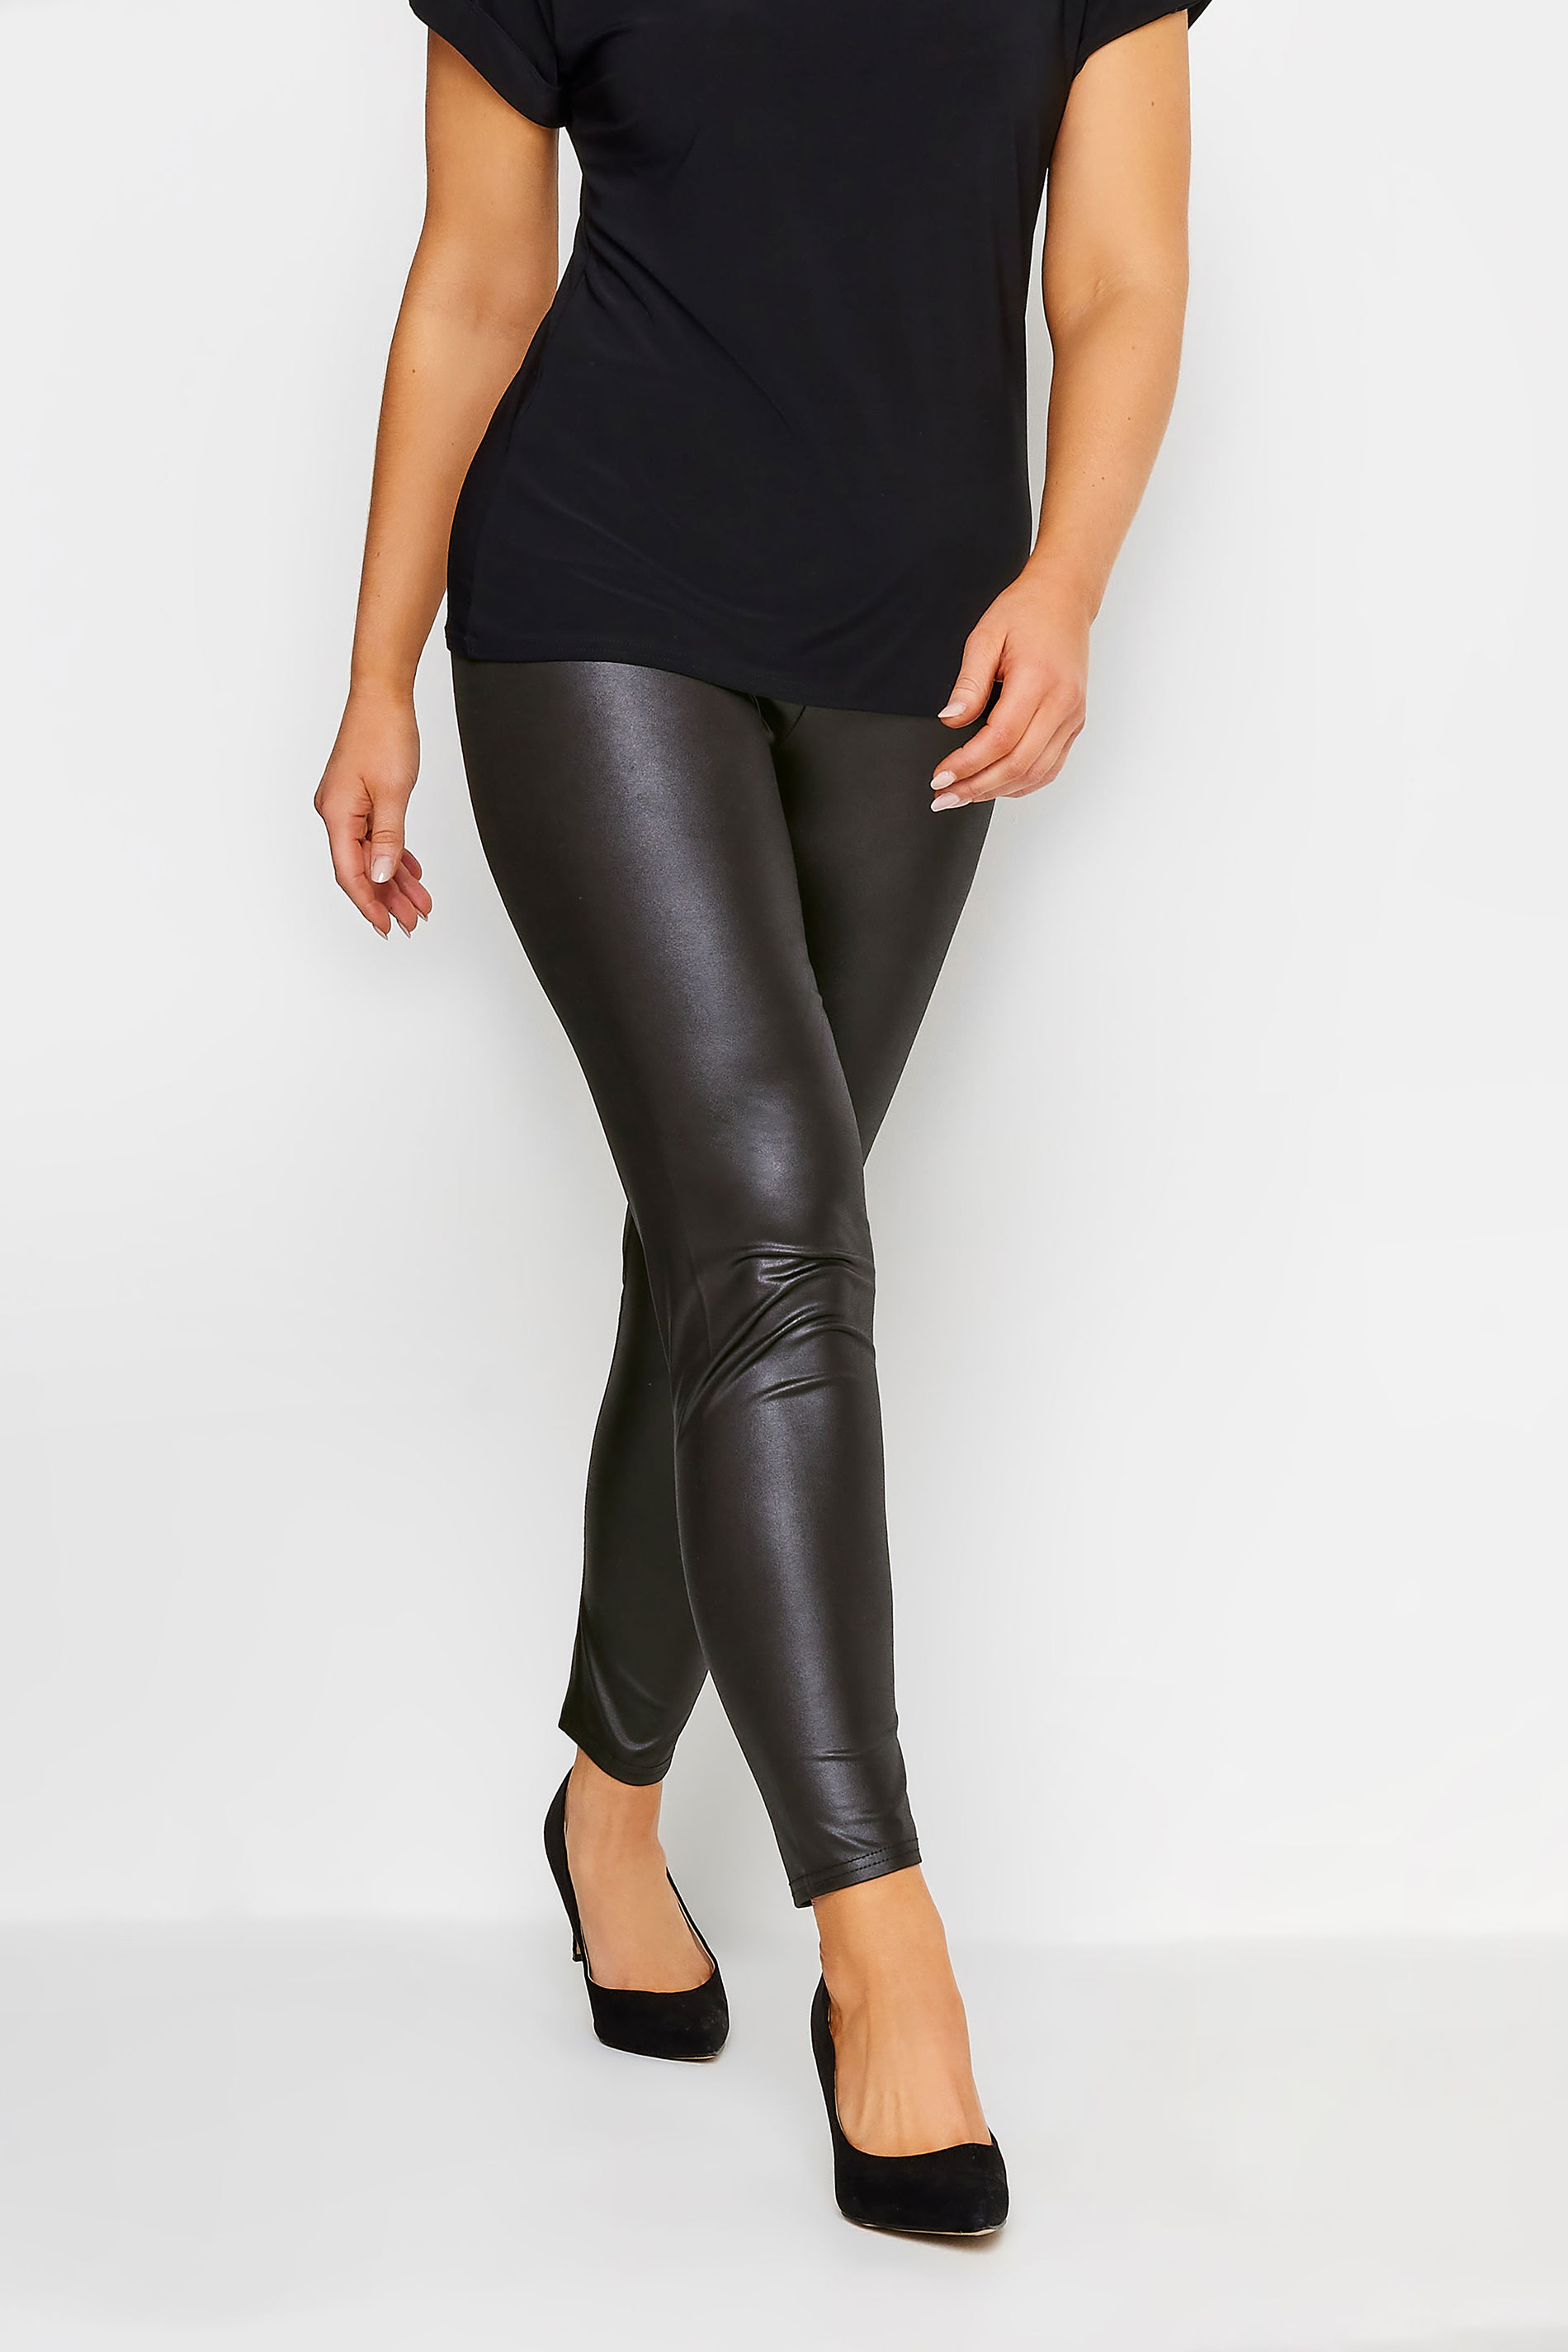 Coquetry - Black Ciré Polished Wet Look Leggings are just $19.99